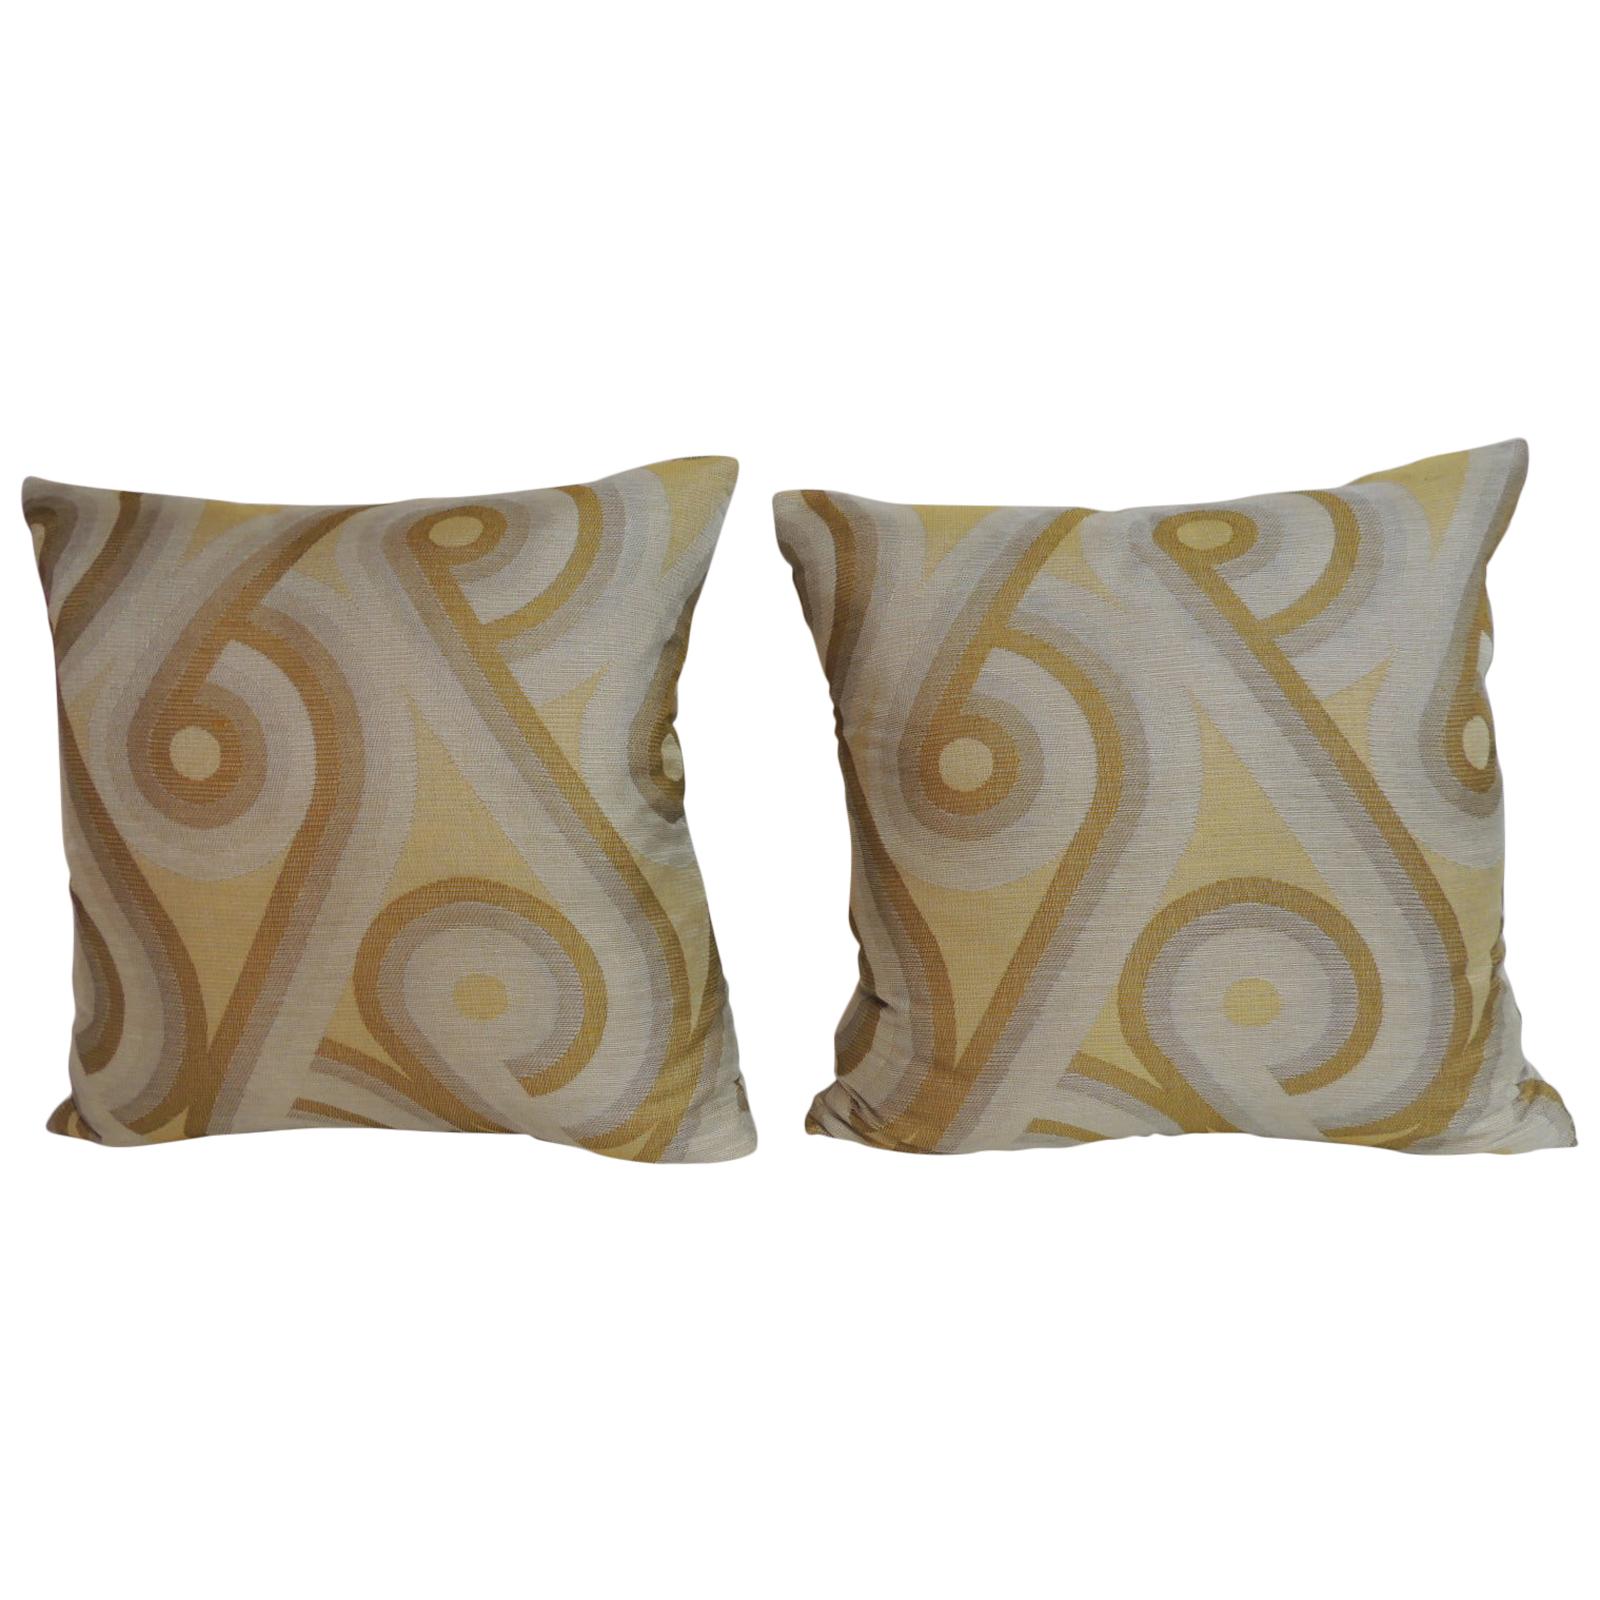 Pair of Mid-Century Modern Gold and Yellow Decorative Pillows